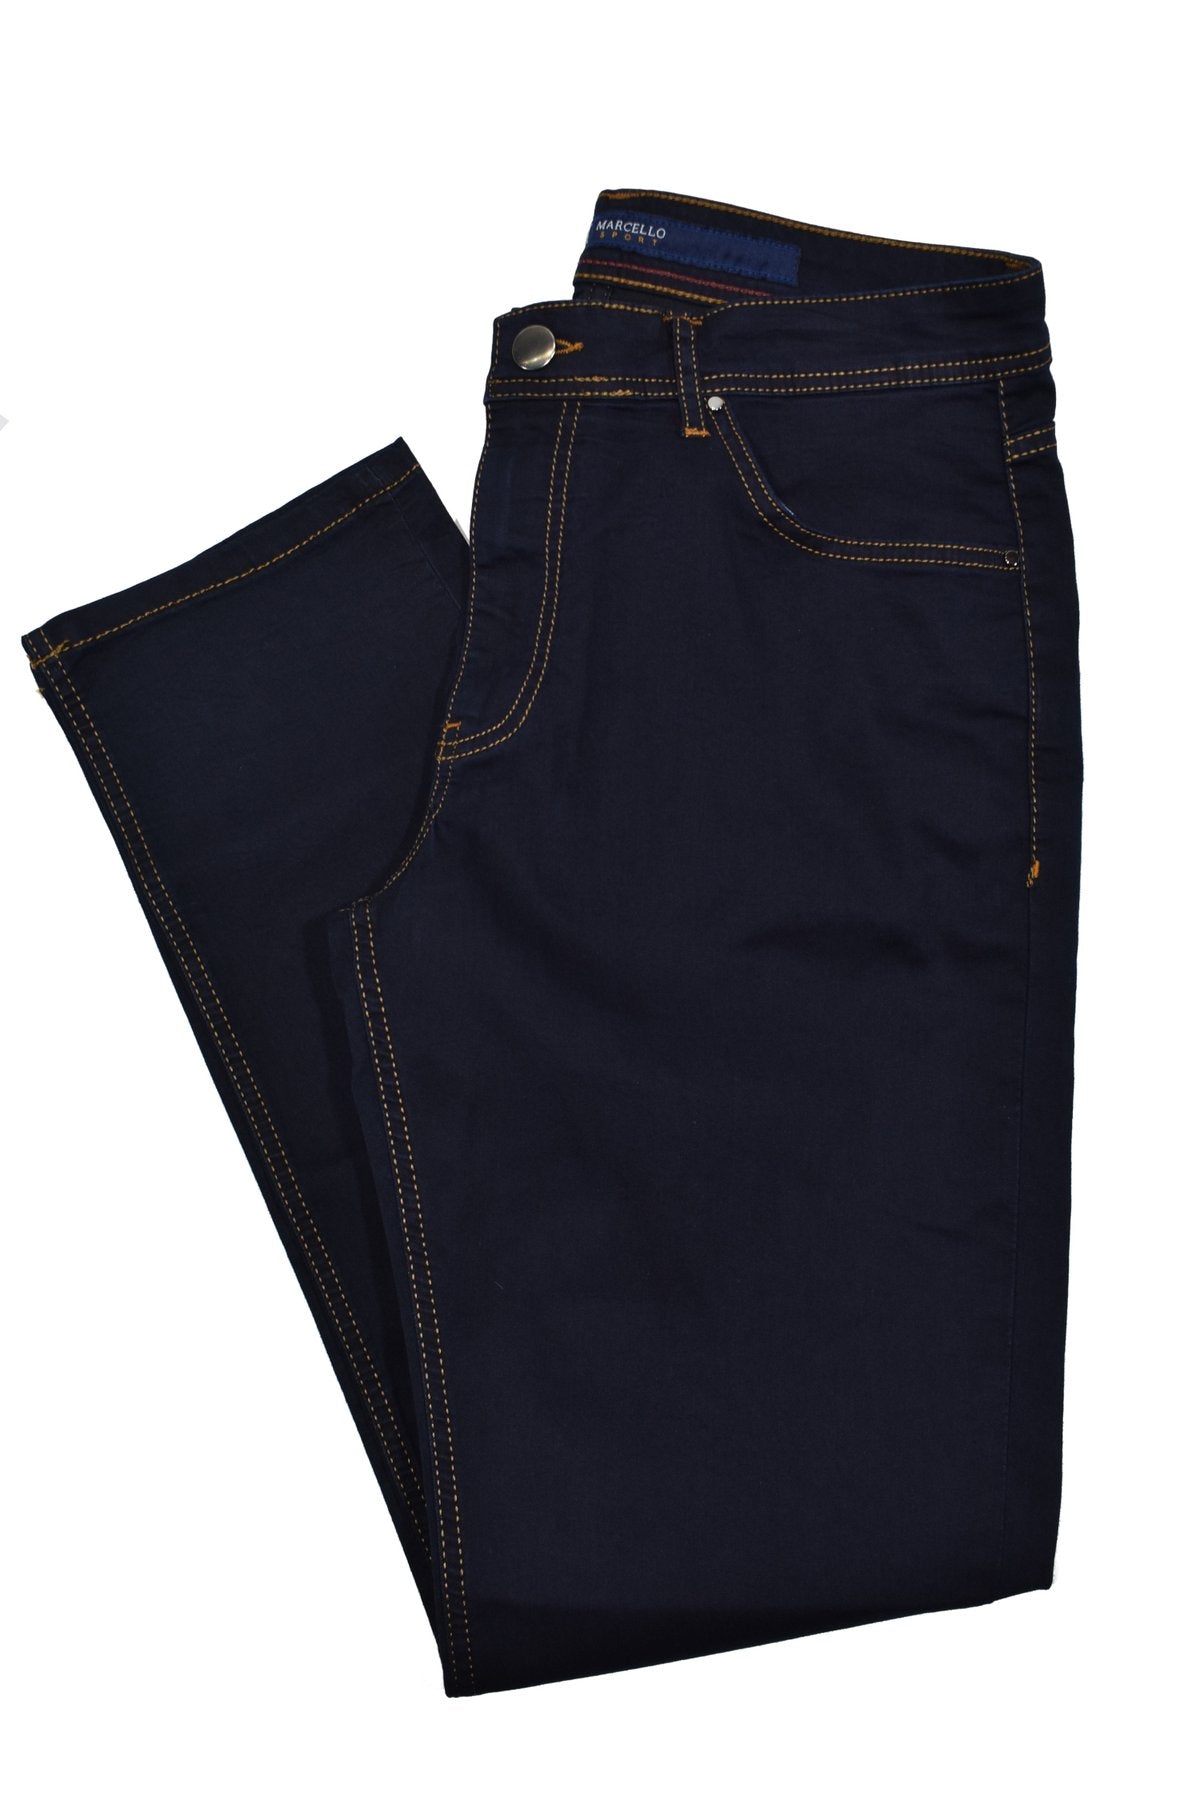 Discover 207+ new design jeans for mens